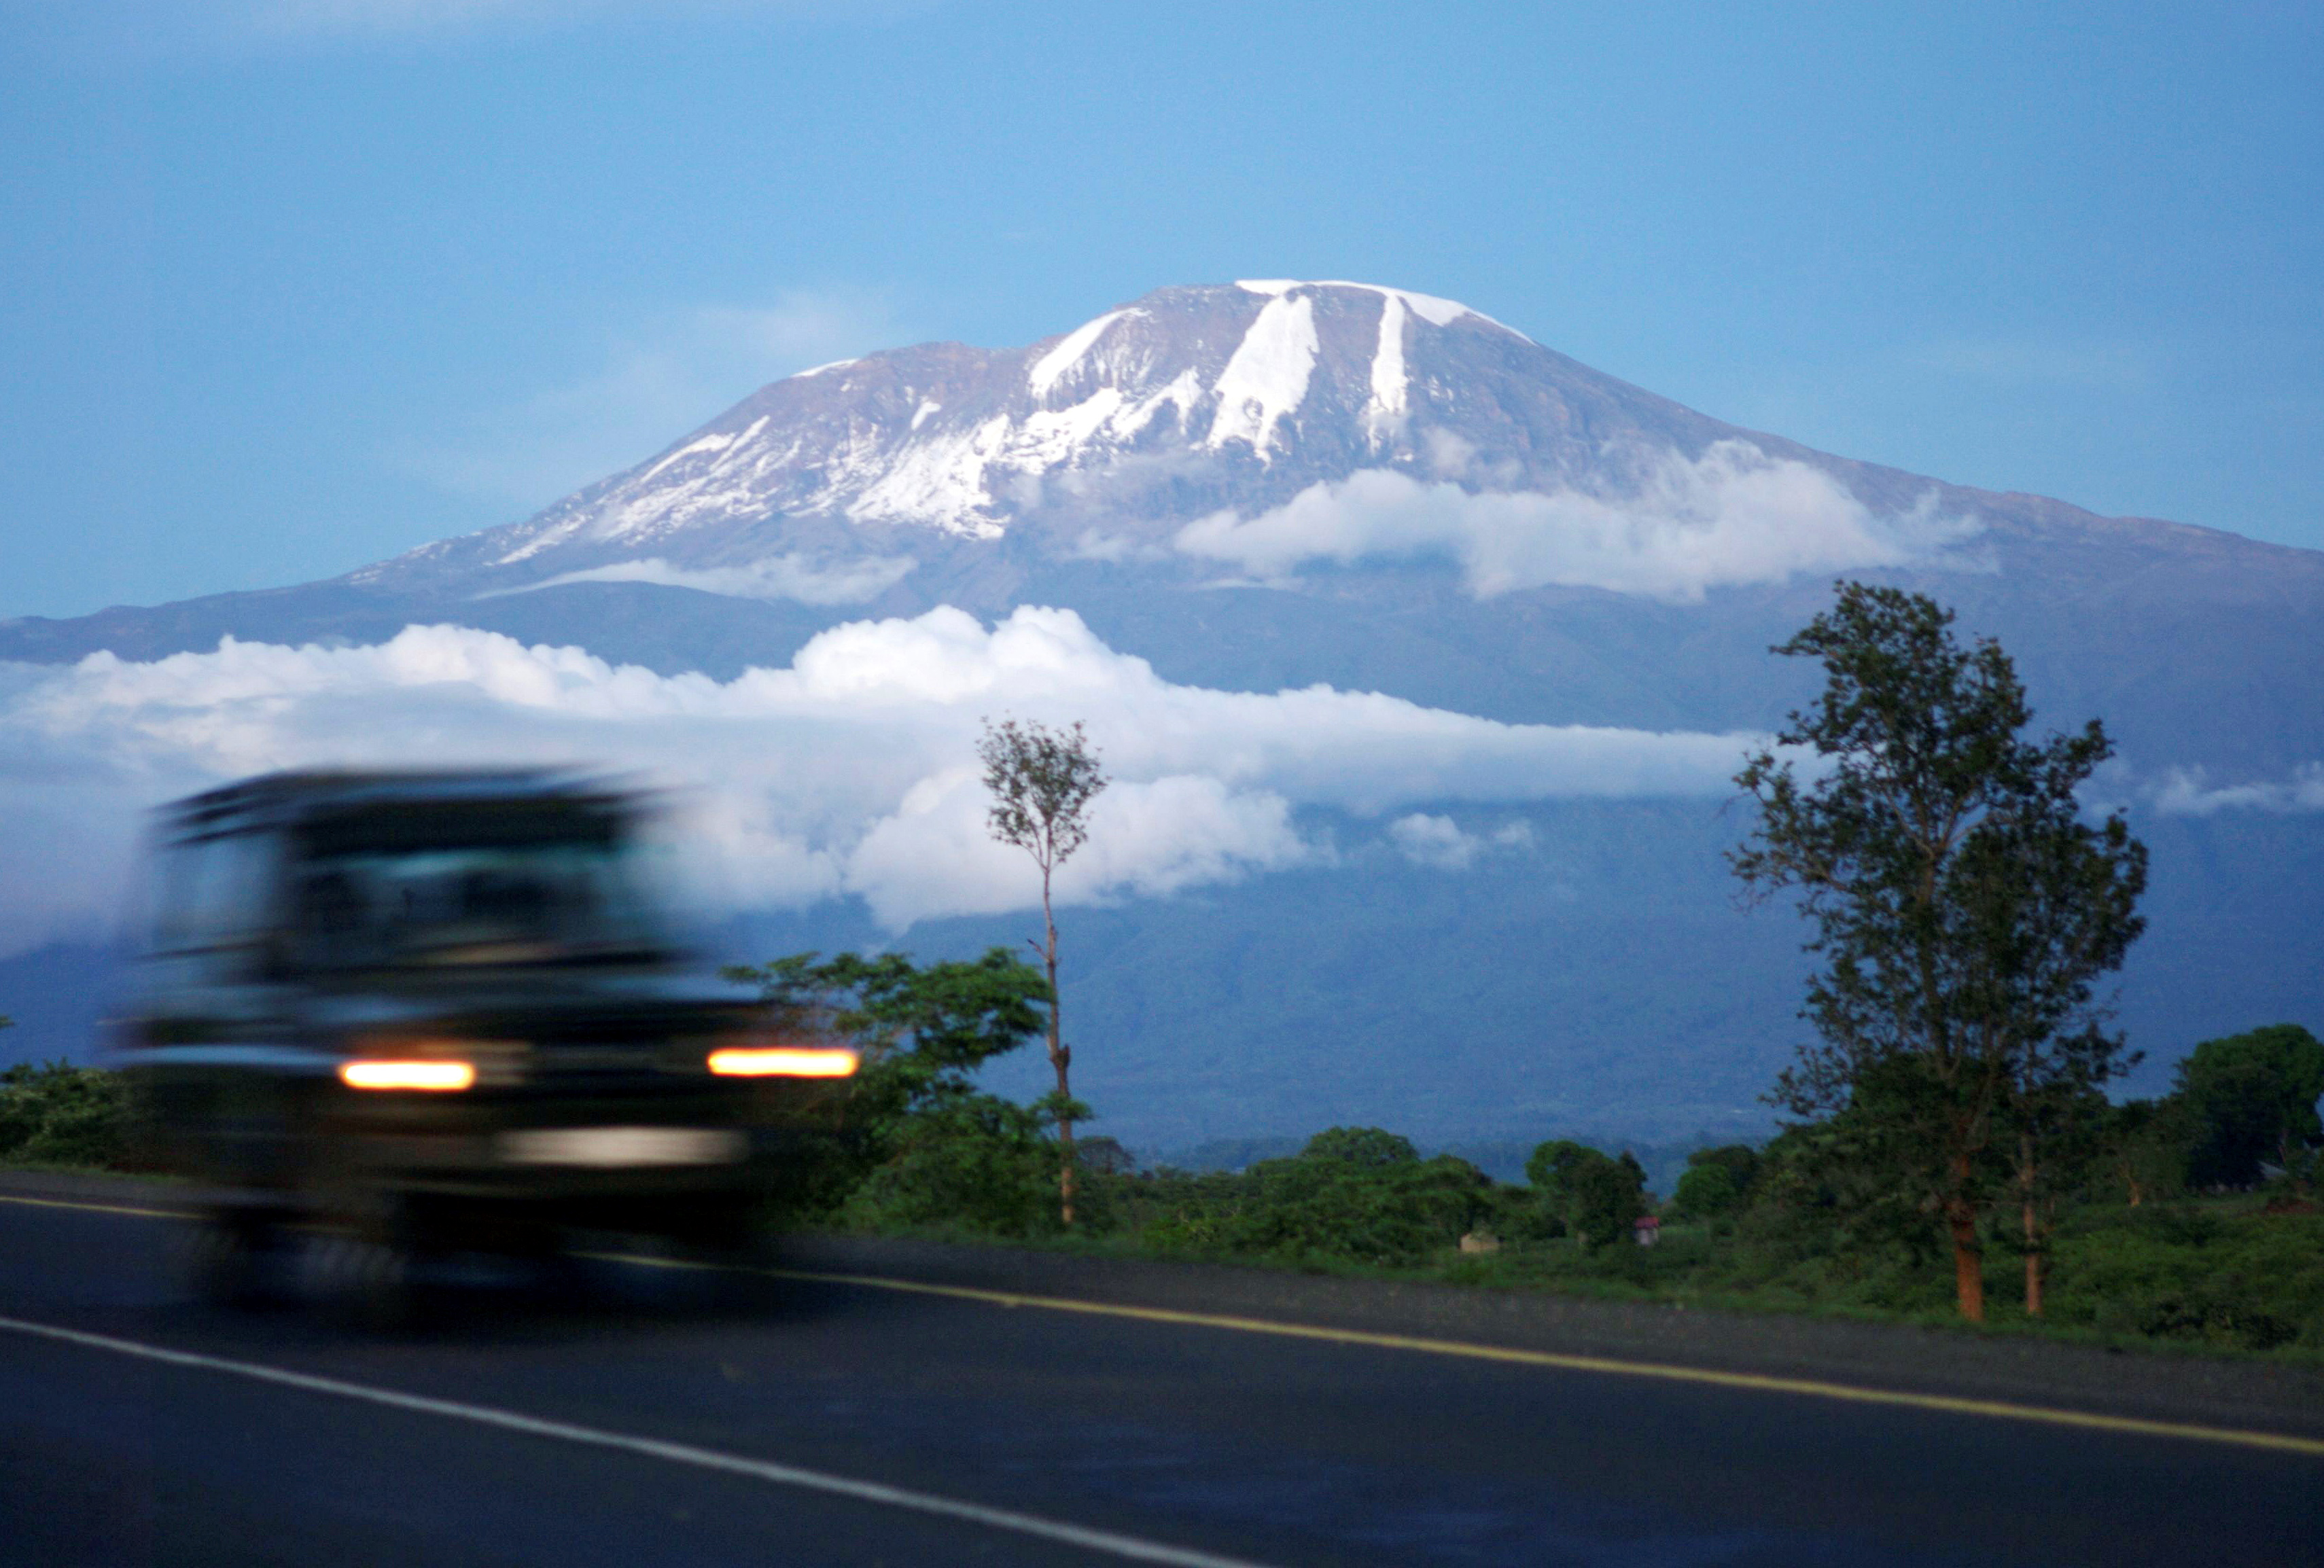 A vehicle drives past Mount Kilimanjaro in Tanzania's Hie district